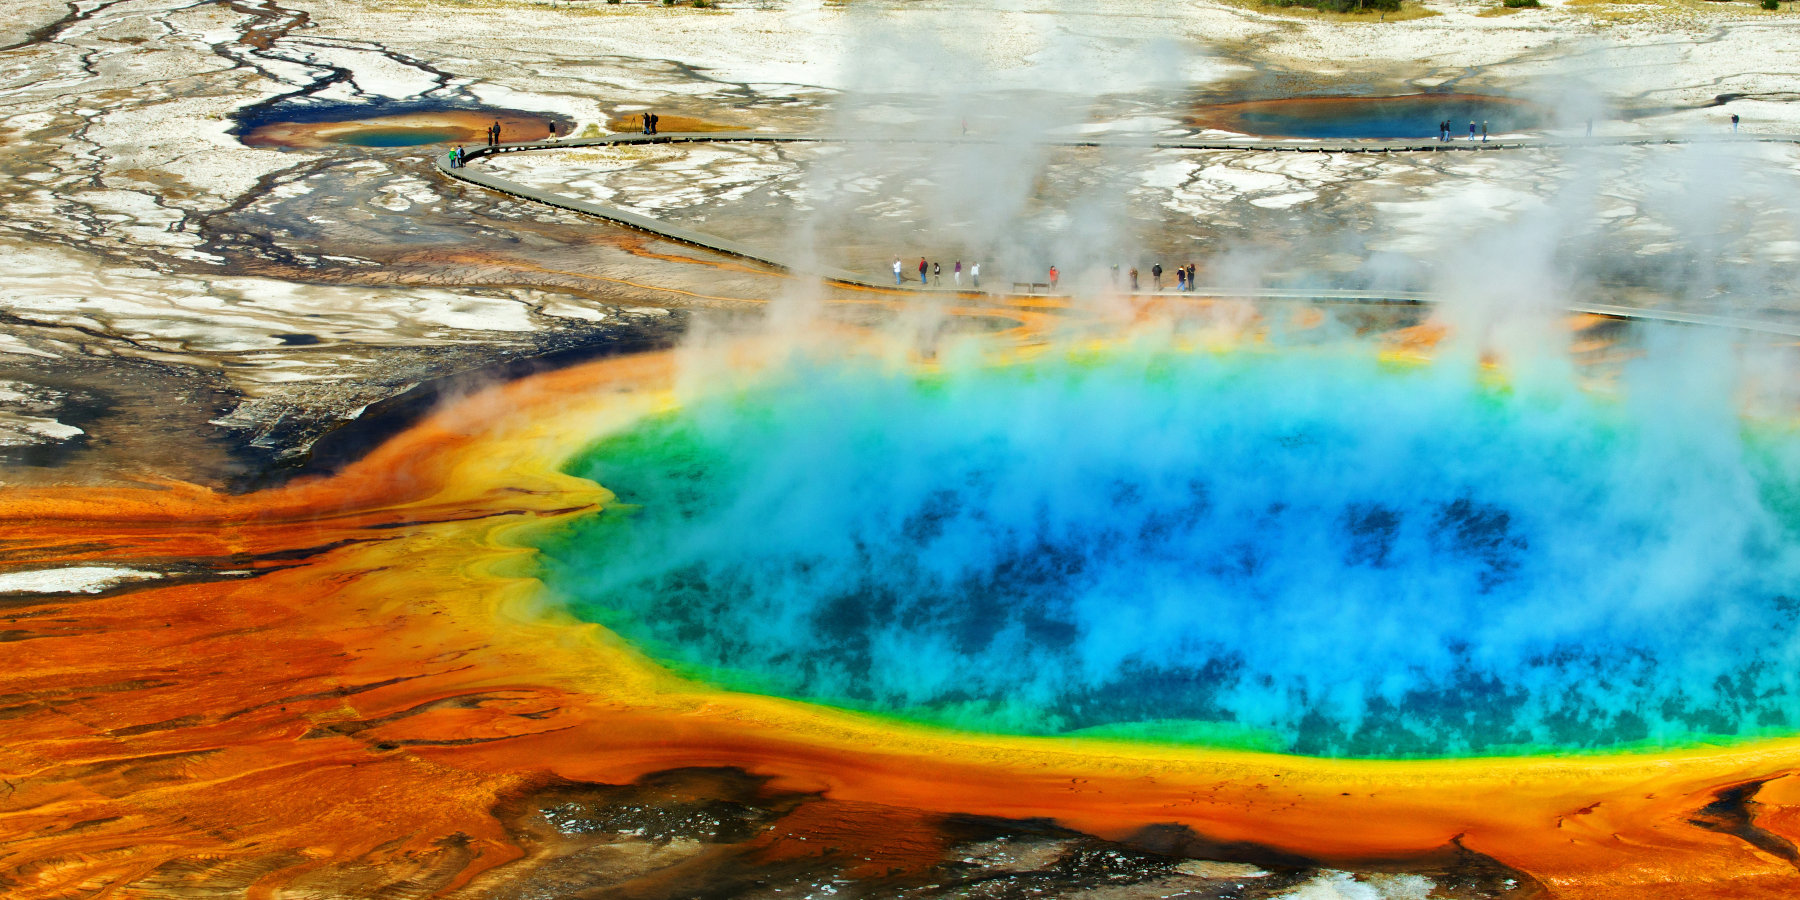 Grand Prismatic, Yellowstone National Park